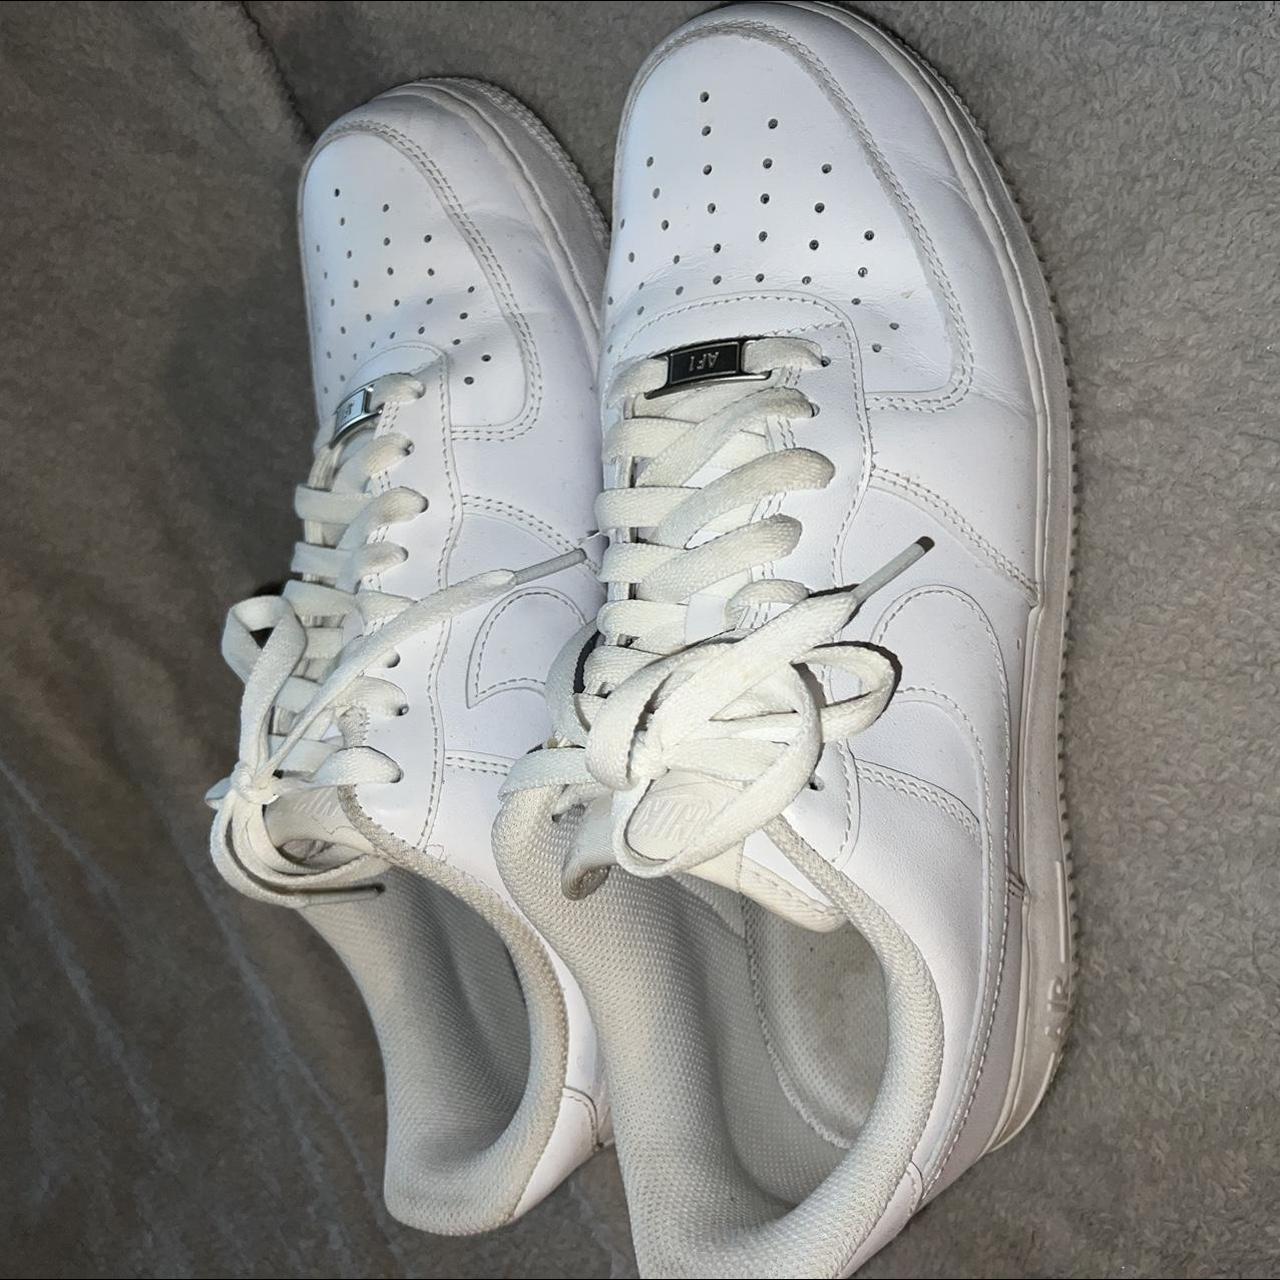 Nike Air Force 1’s 9.5M/ 11W US Size - Depop